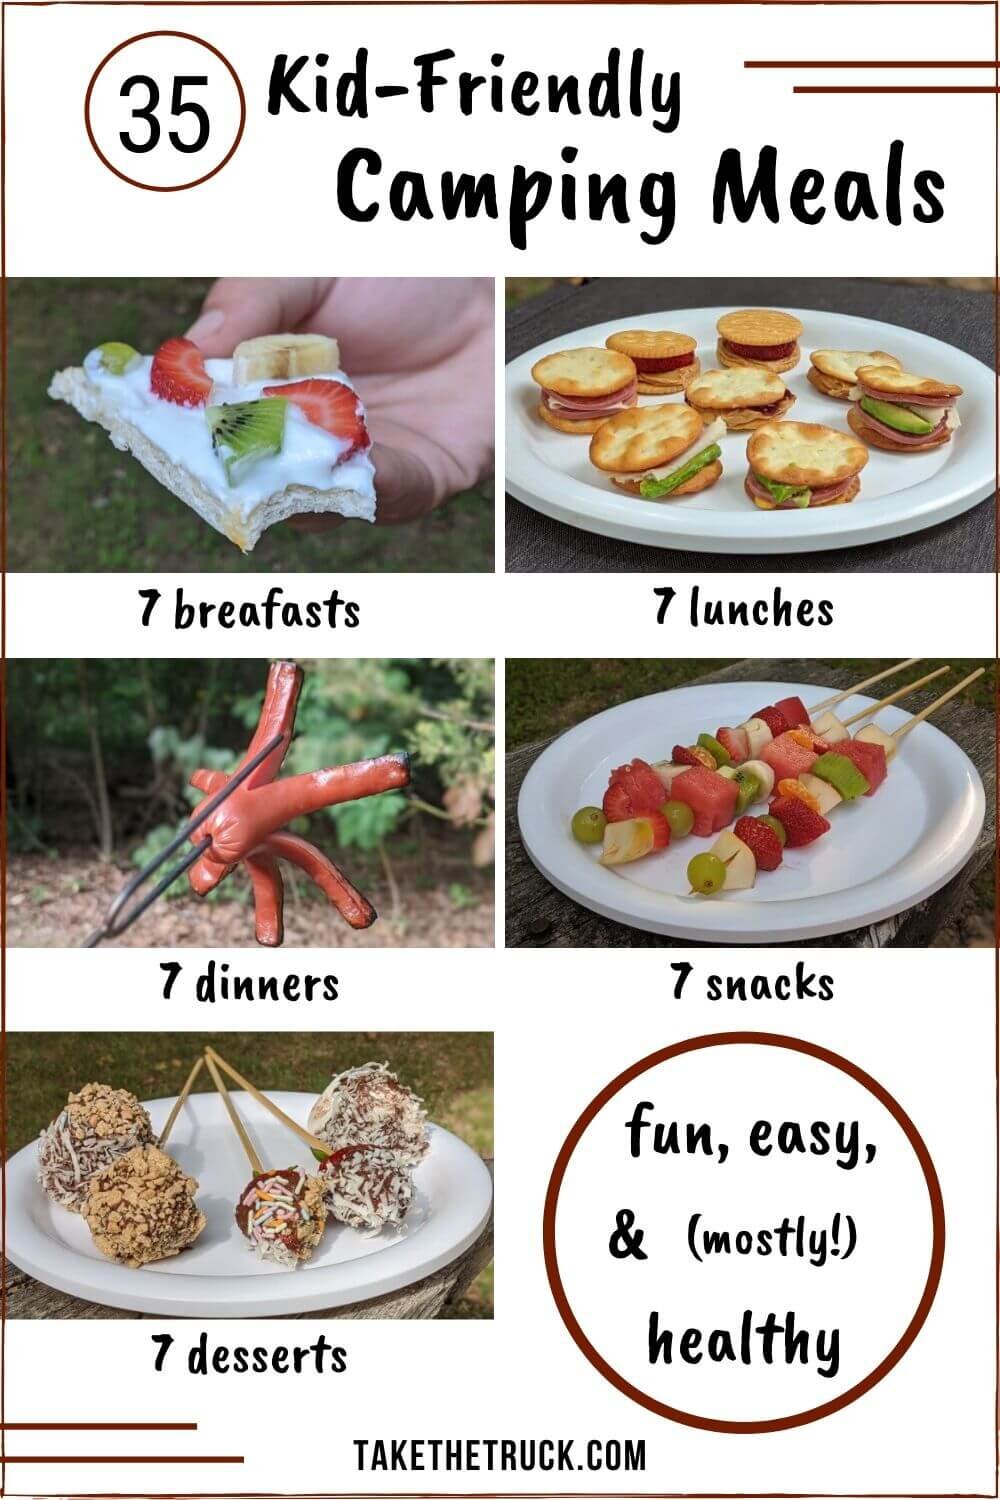 These 35 camping meals for kids are organized into camping breakfasts, lunches, dinners, plus healthy camping snacks and fun kid friendly desserts. Plenty of fun camping food ideas for kids!